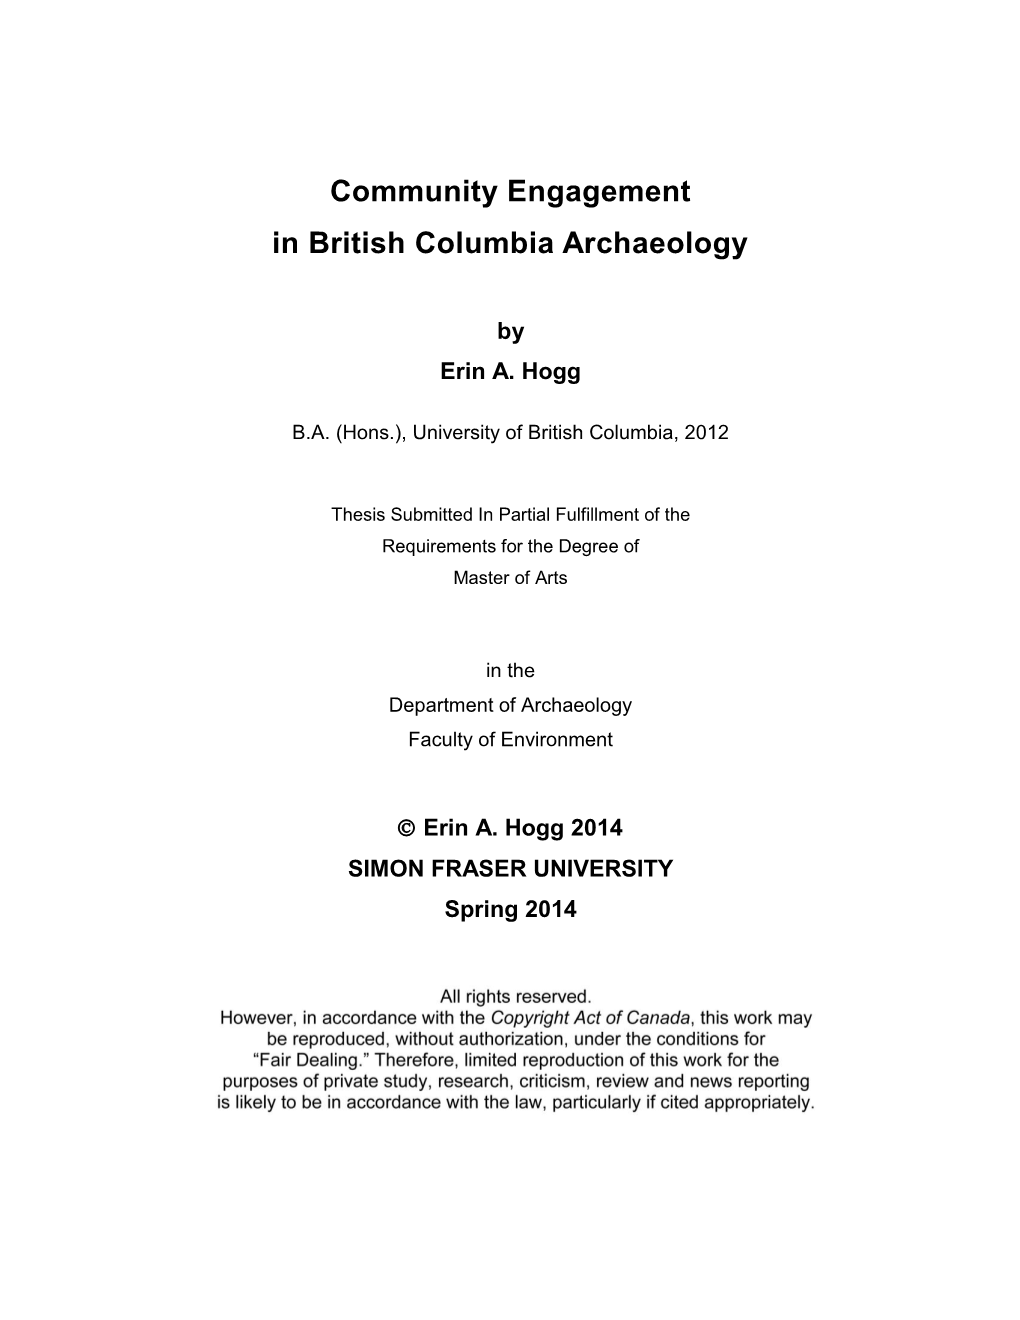 Community Engagement in British Columbia Archaeology